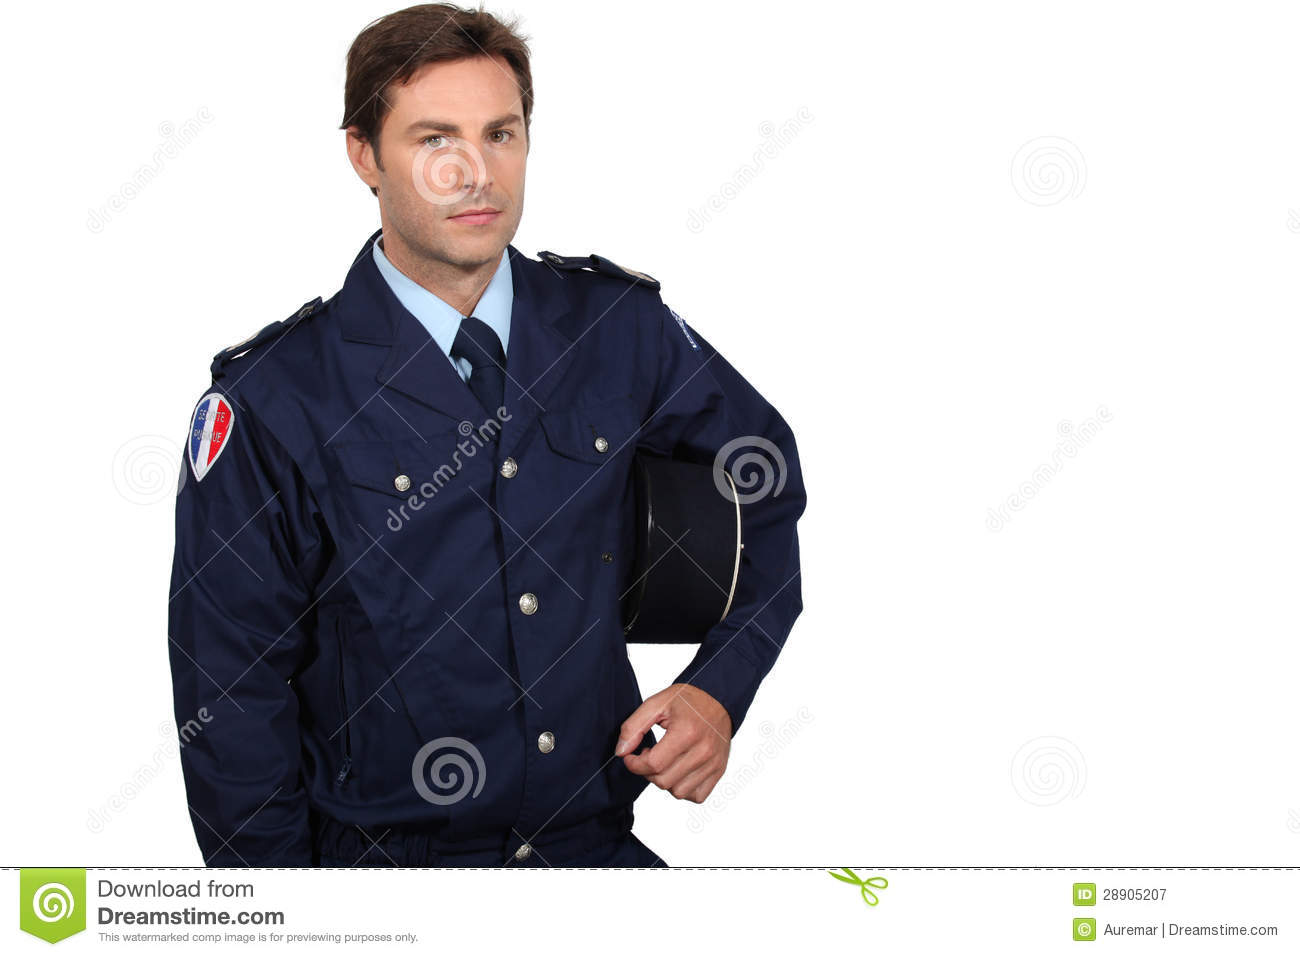 French Policeman Royalty Free Stock Photography   Image  28905207